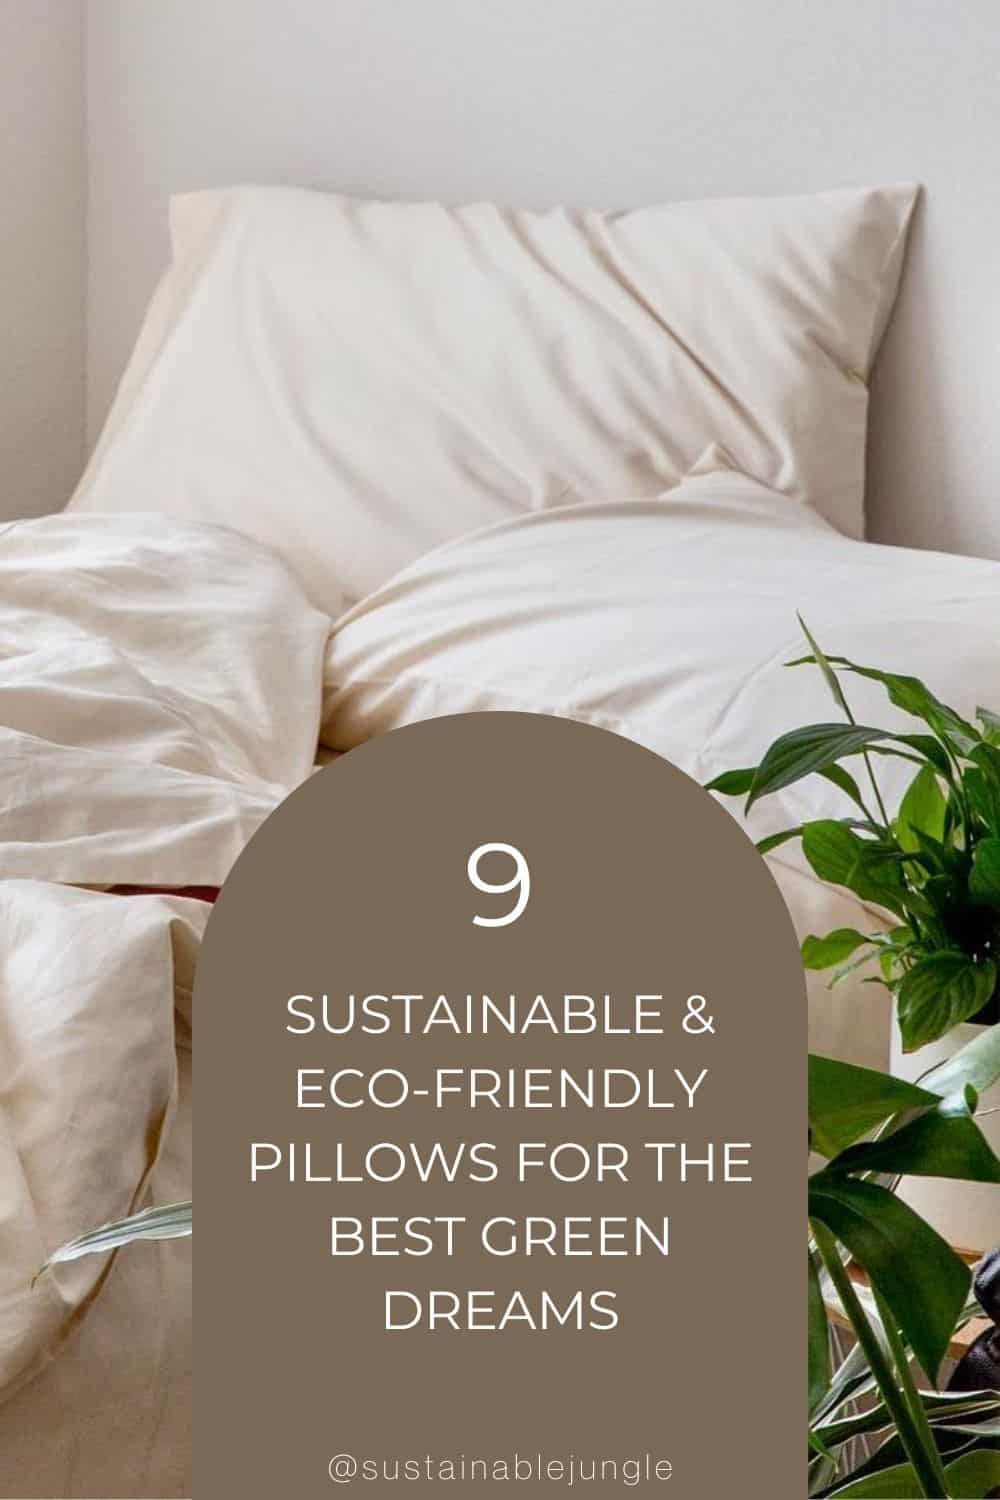 9 Sustainable & Eco-Friendly Pillows For The Best Green Dreams Image by Sleep & Beyond #ecofriendlypillows #ecofriendlythrowpillows #sustainablepillows #ecofriendlymemoryfoampillows #naturalecofriendlypillows #sustainablebedpillows #sustainablejungle